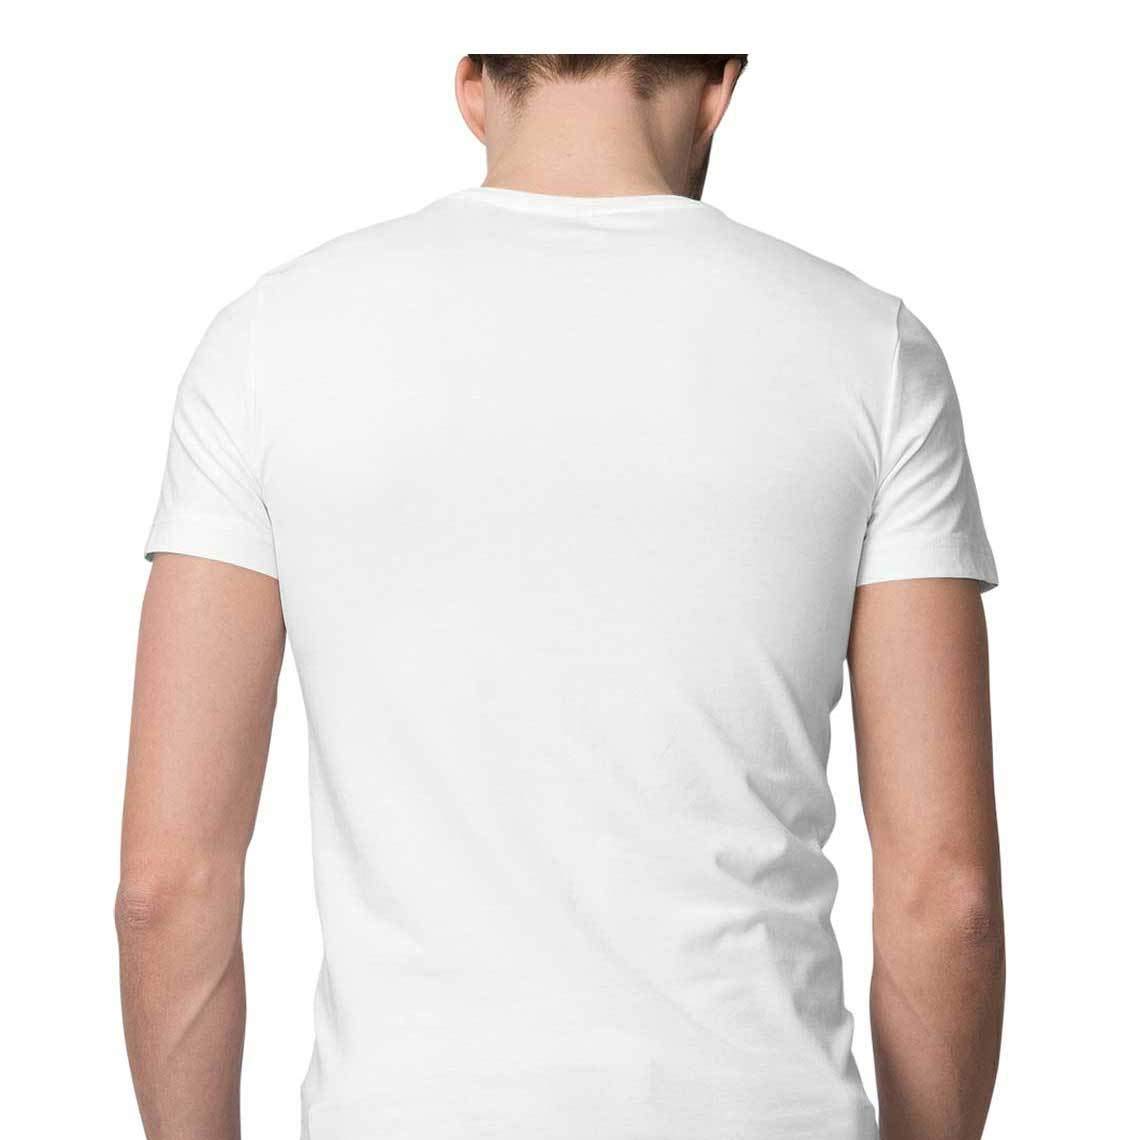 Fathers day Printed Tshirt for Men|Graphic Printed White t shirts for dads|Best dad